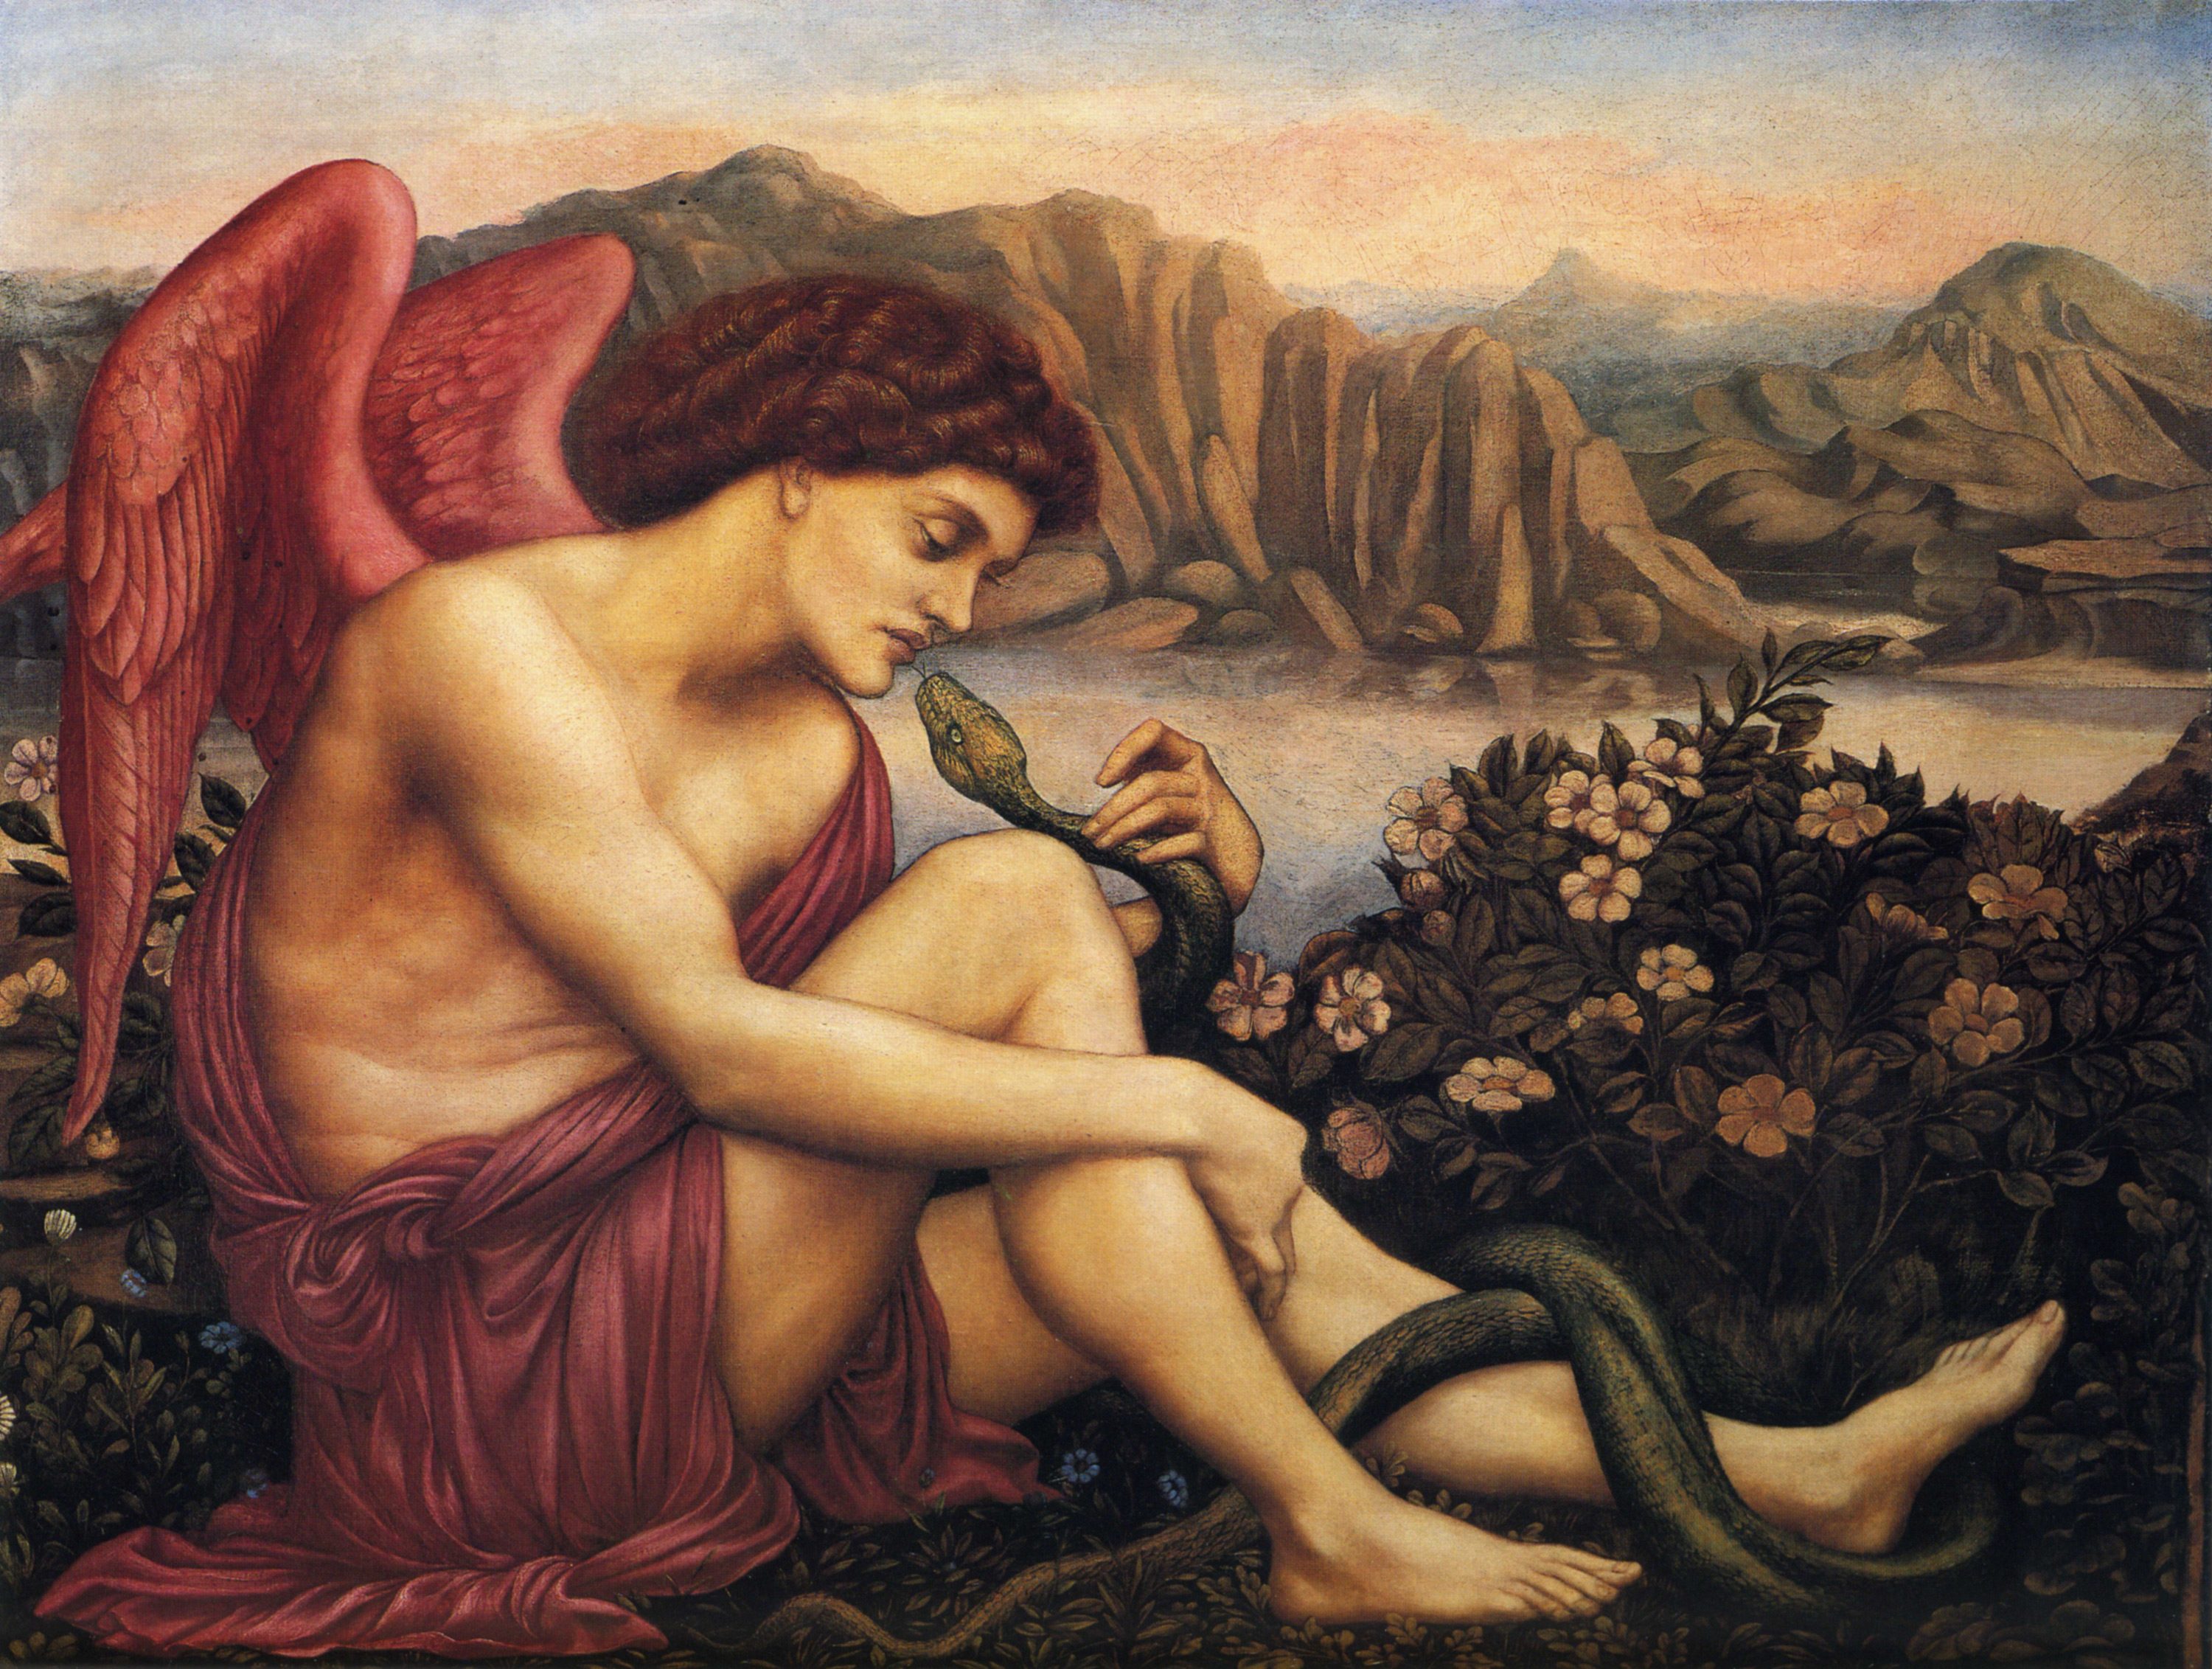 File:Evelyn de Morgan - The Angel with the Serpent, 1870-1875.jpg